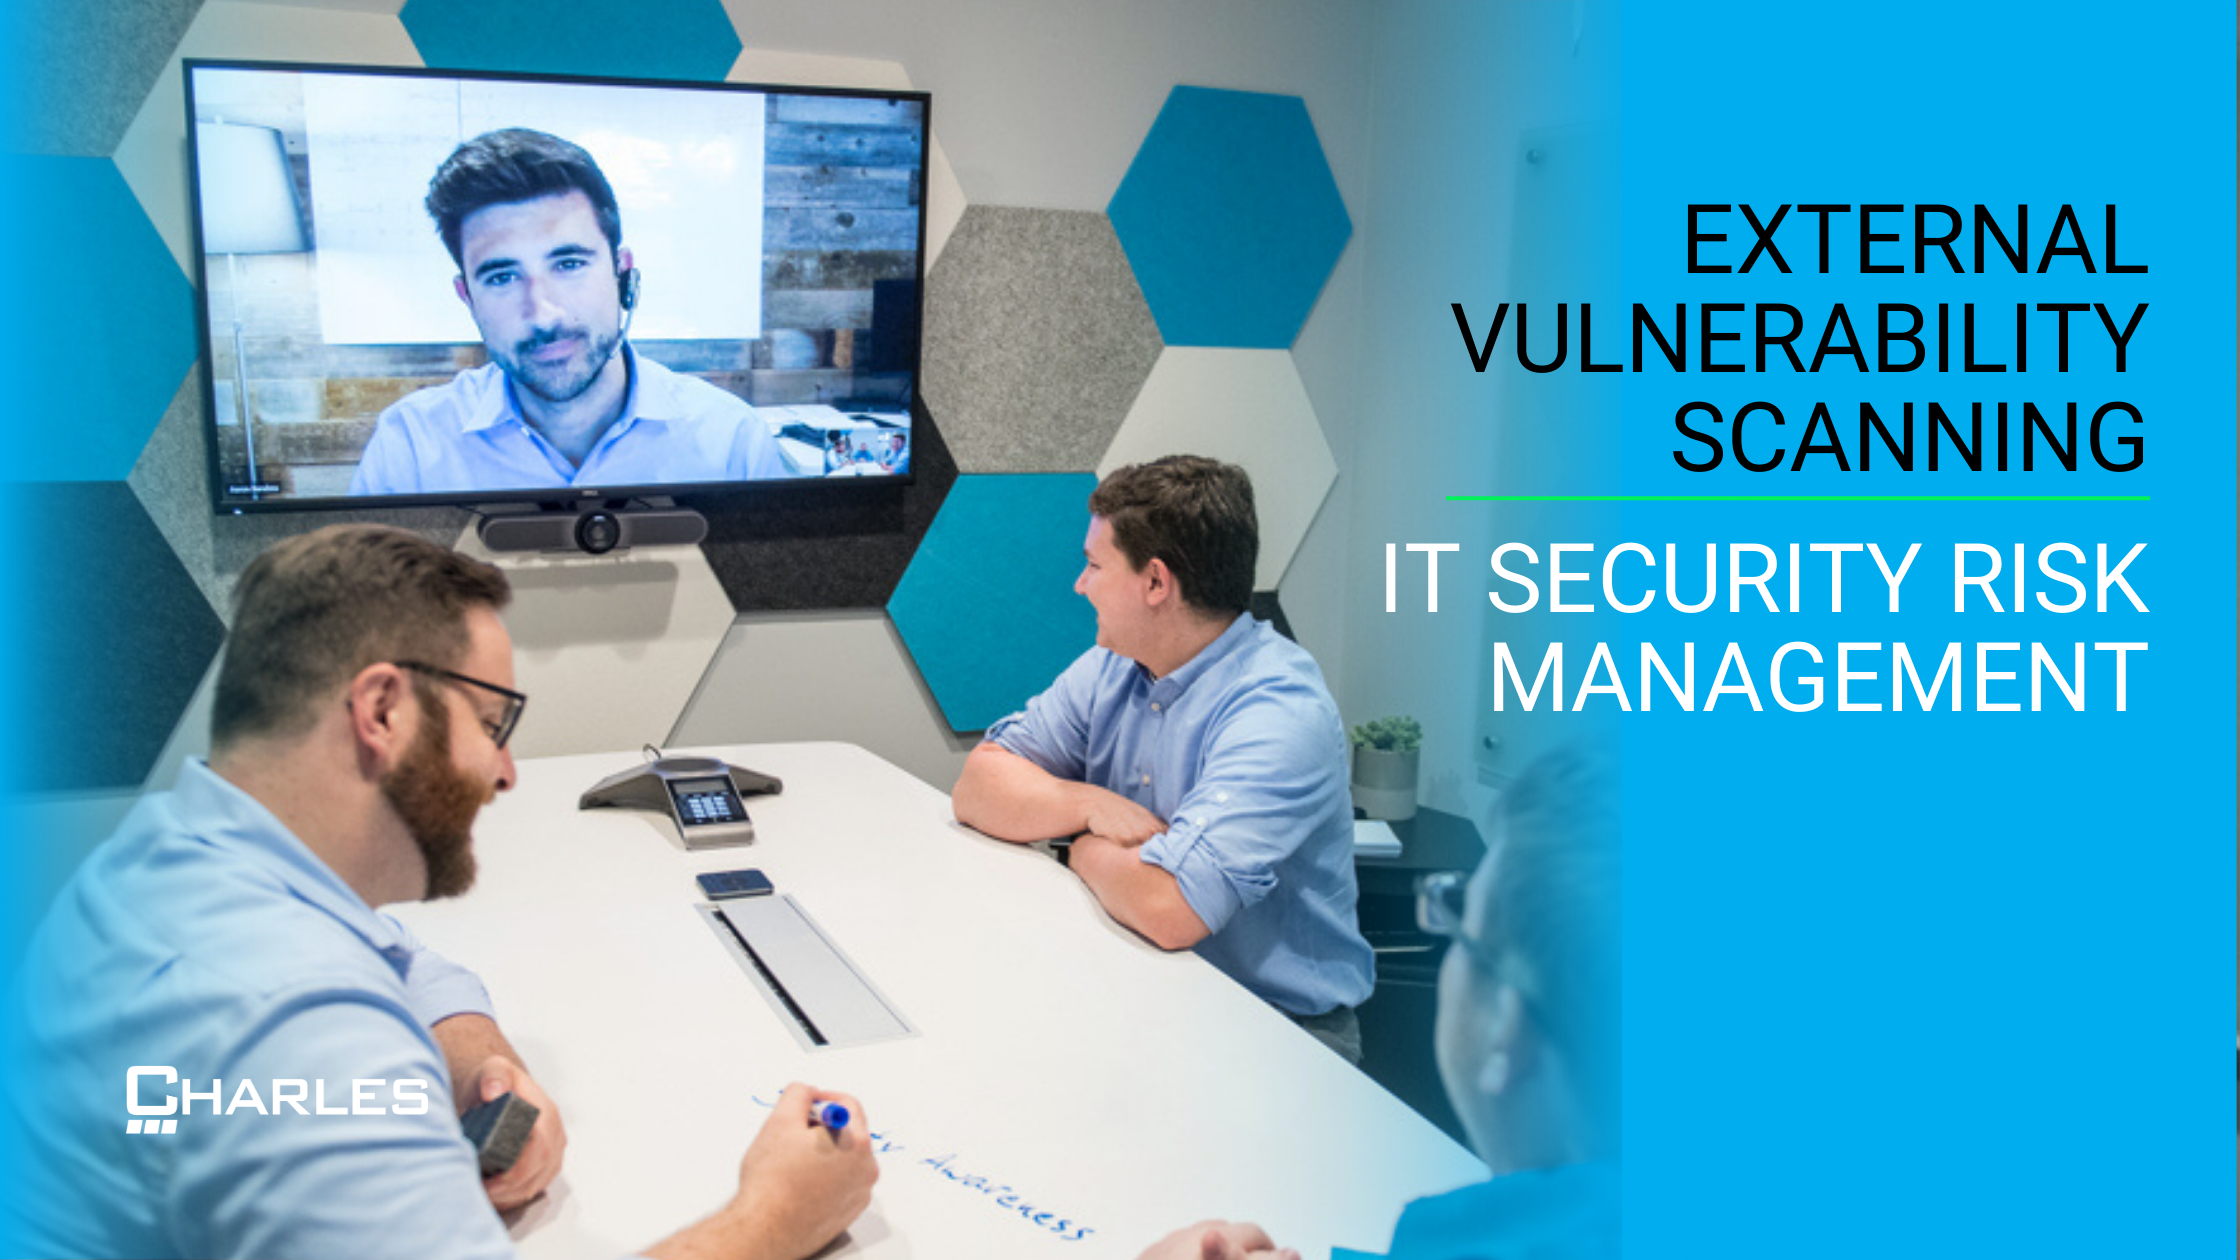 Why Is External Vulnerability Scanning Critical to IT Security Risk Management?